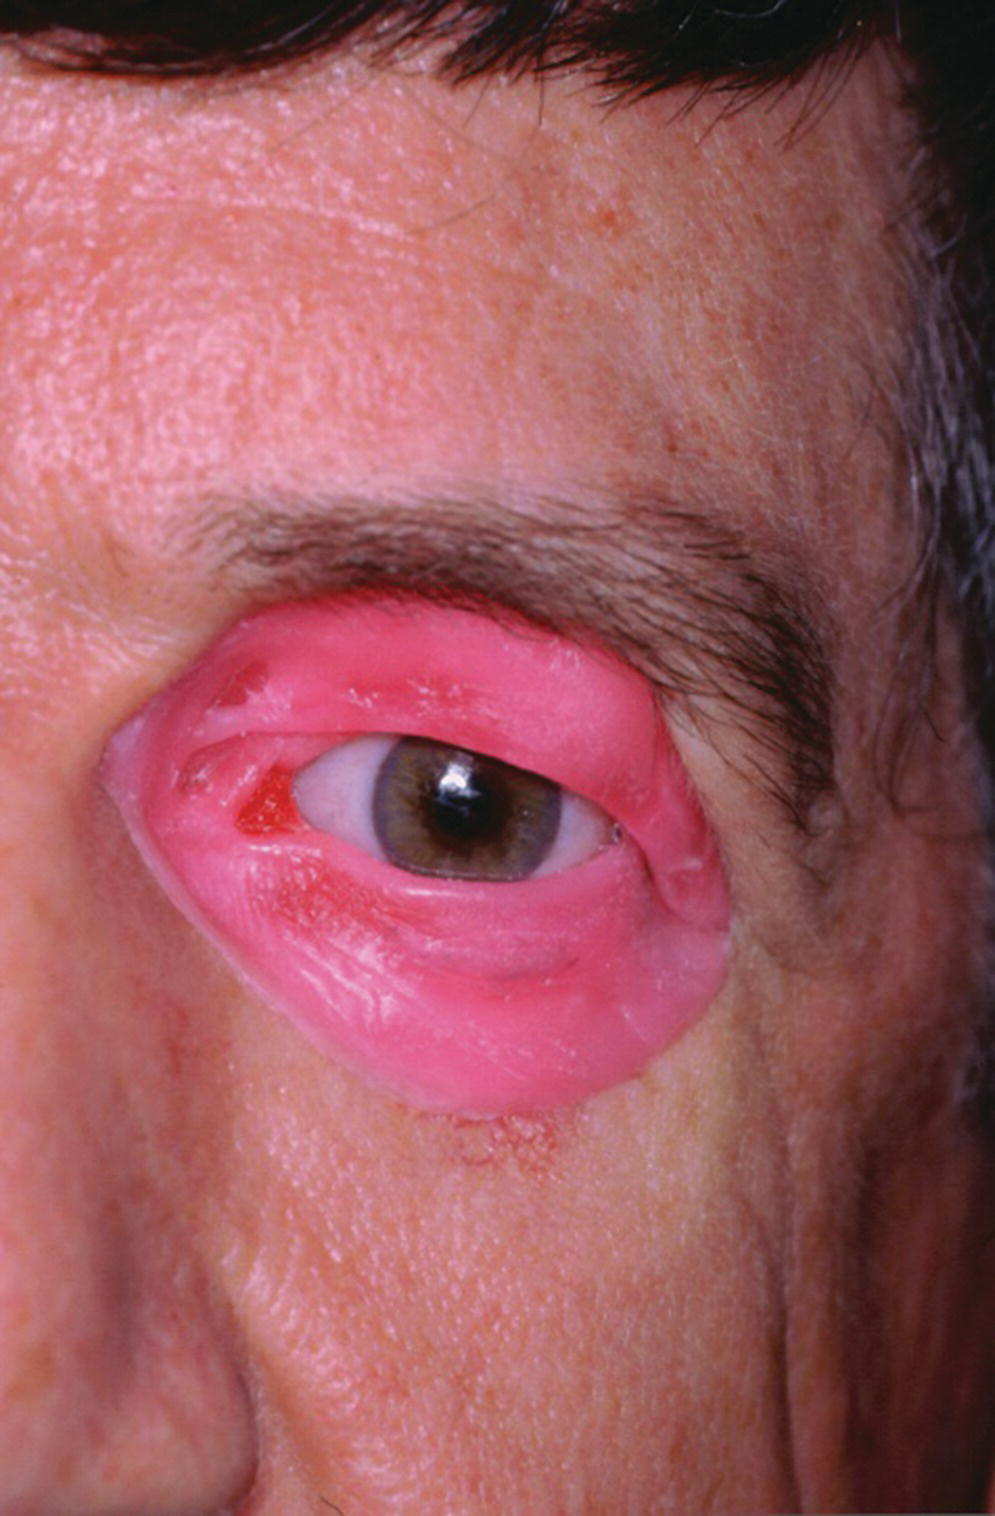 Photo of patient's left eye with surrounding area subjected to diagnostic waxing for presurgical planning.